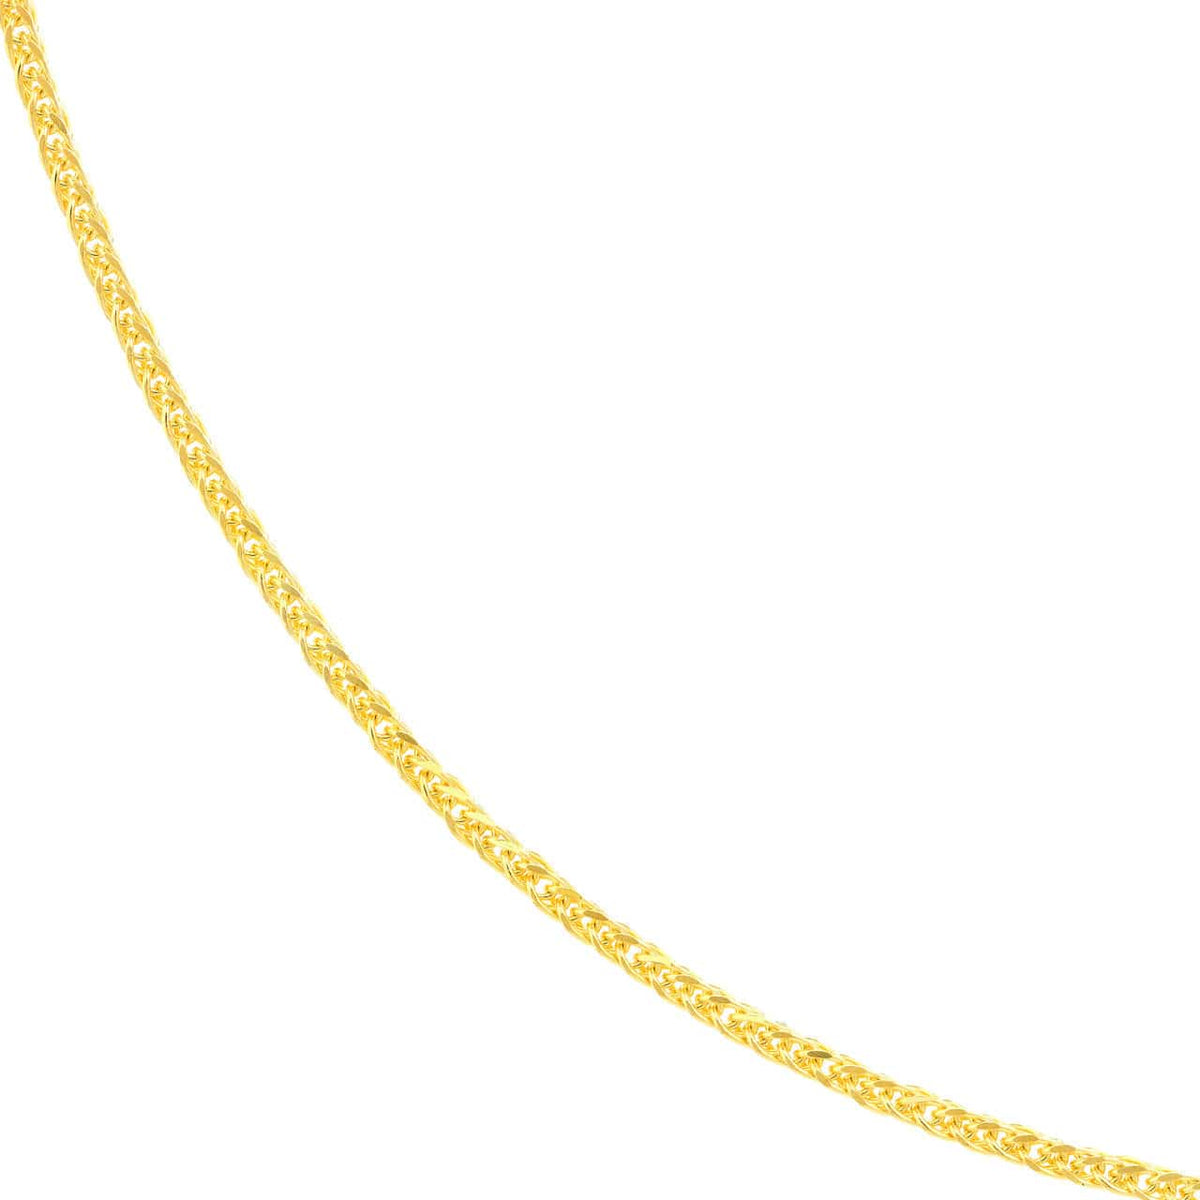 14K Gold 1.25mm D/C Square Wheat Chain Necklace with Lobster Lock